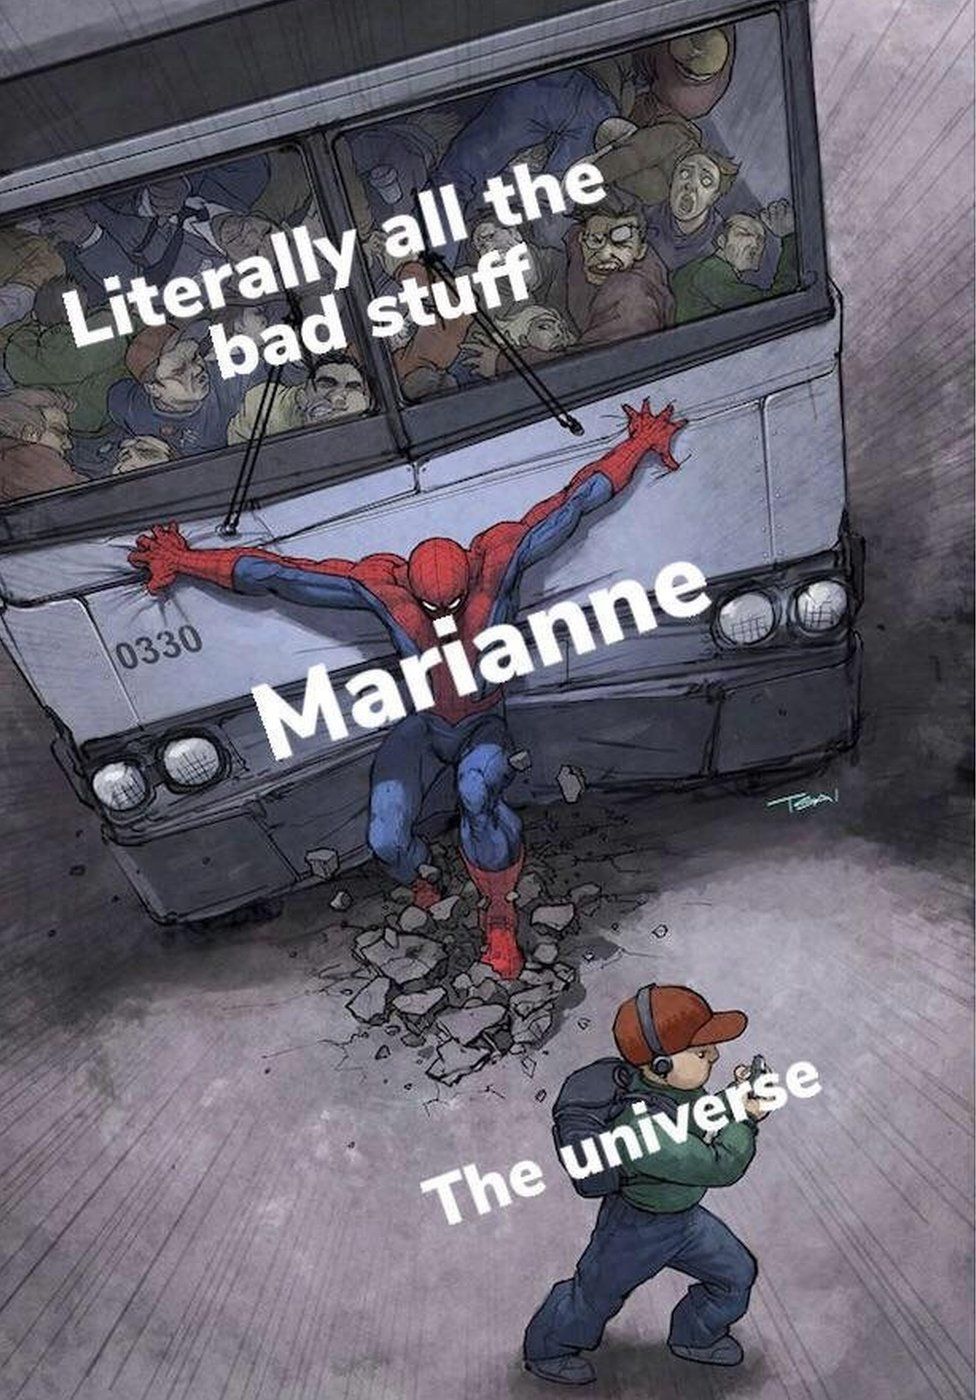 A meme based on comic book hero Spider-Man. Marianne Williamson is Spider-Man, holding back a bus labelled 'literally all the bad stuff' from hitting a child labelled 'the universe'